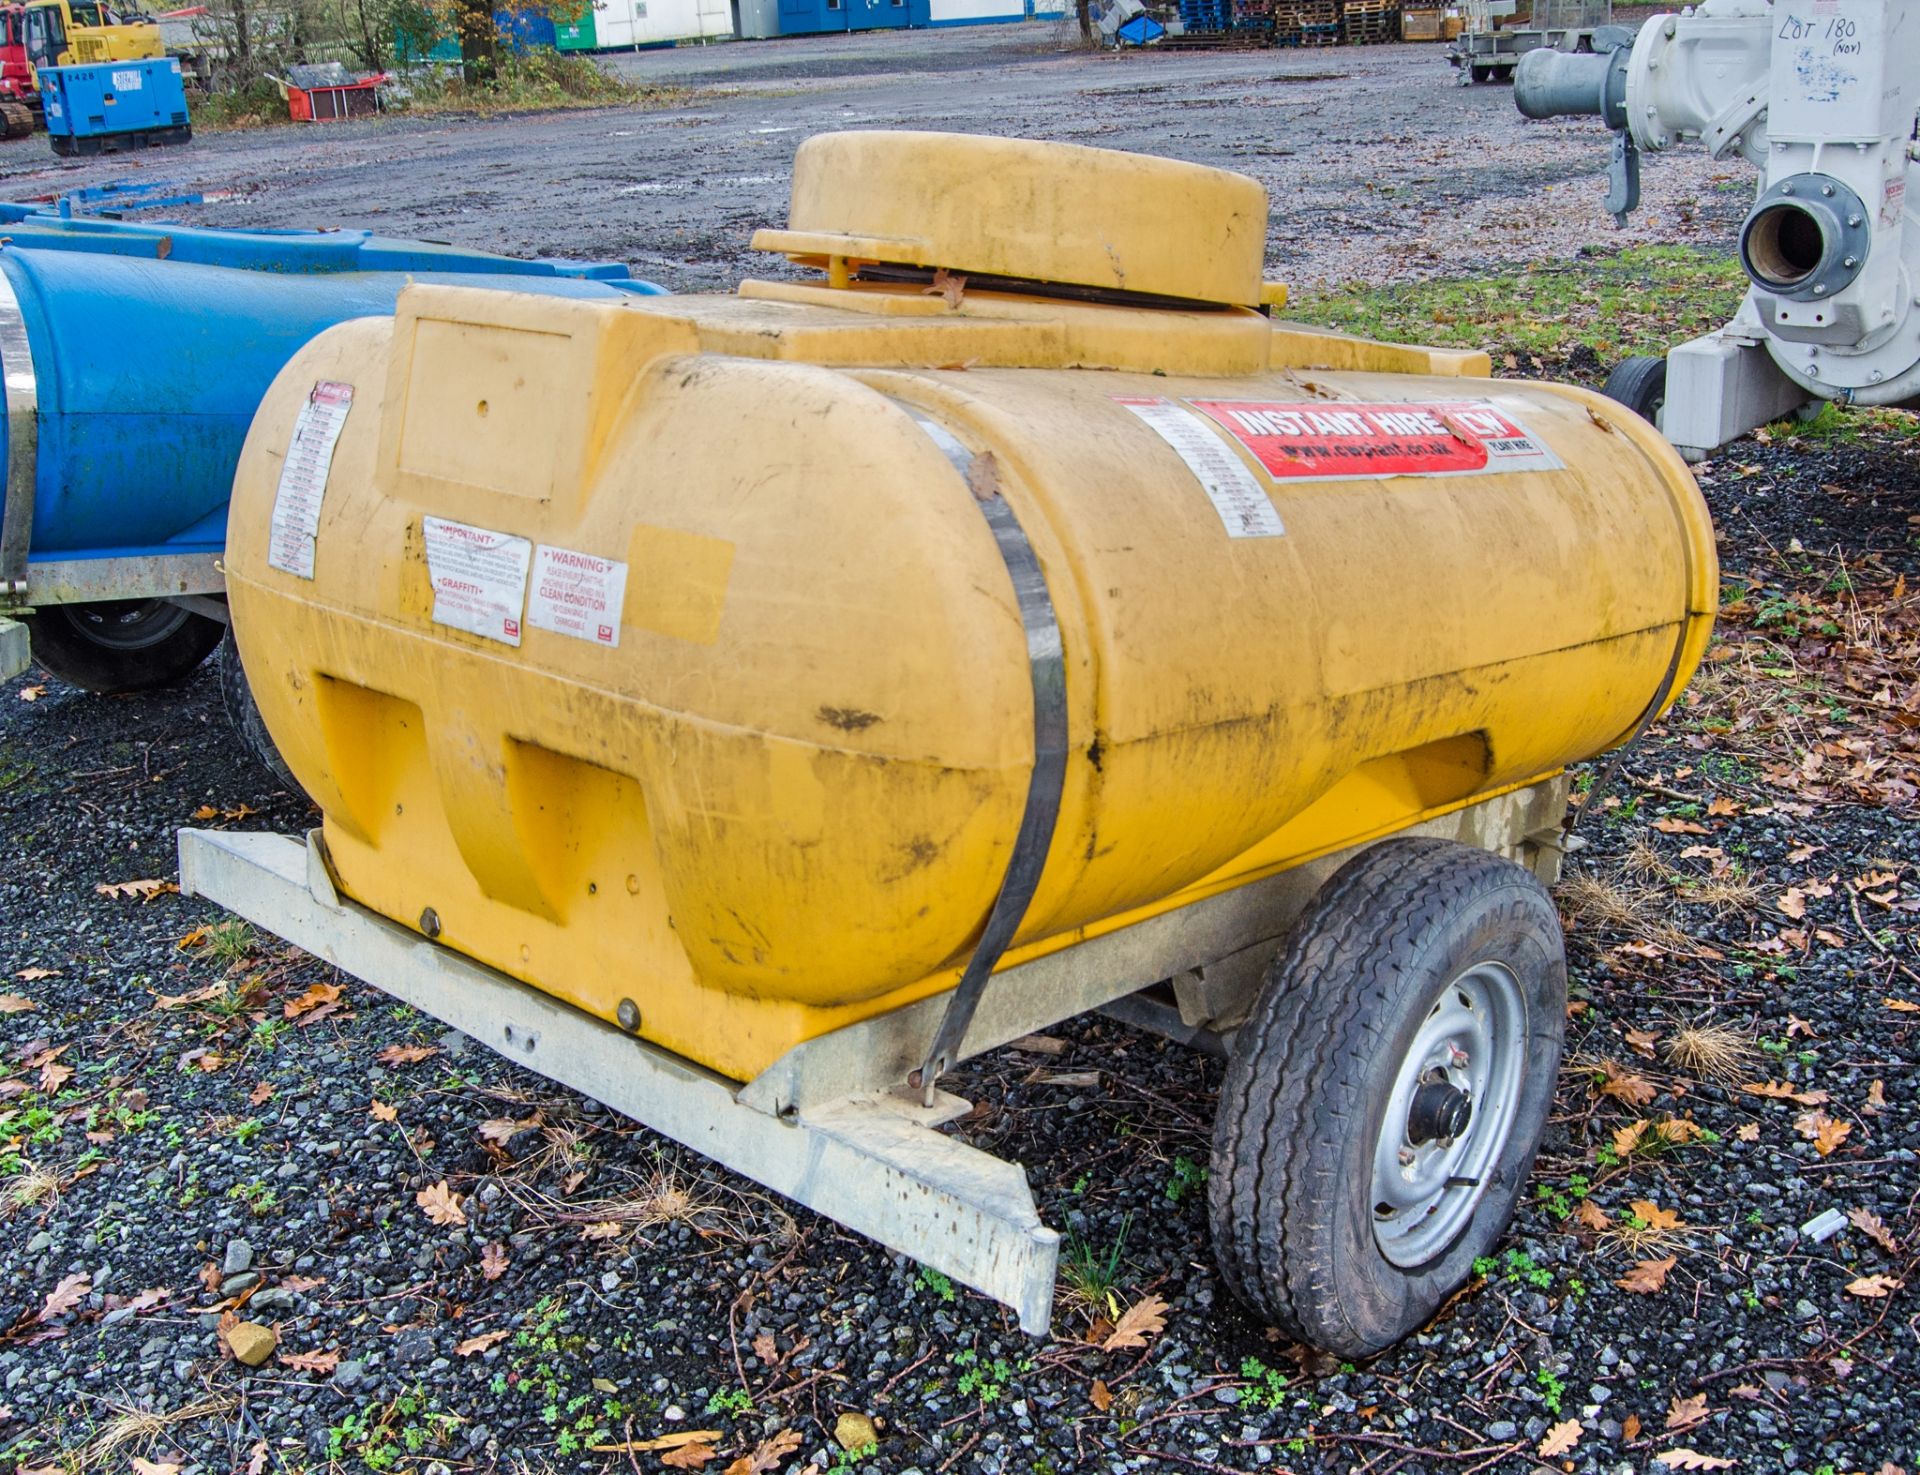 Trailer Engineering 1125 litre site tow water bowser CW85518 - Image 2 of 4